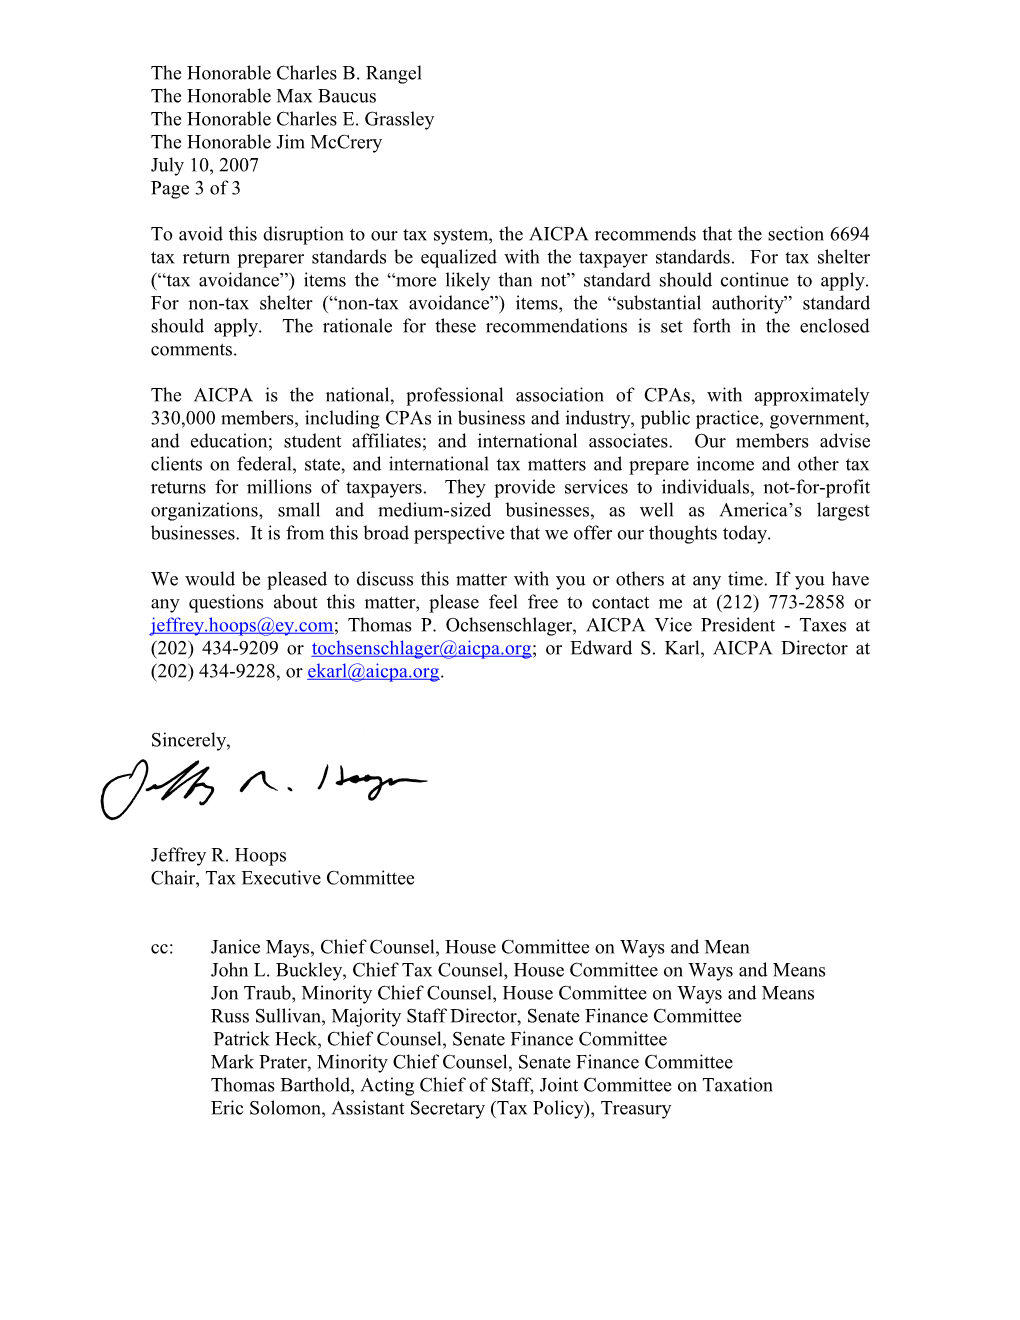 AICPA Letter to House and Senate Tax-Writing Committees Urging a Legislative Change To